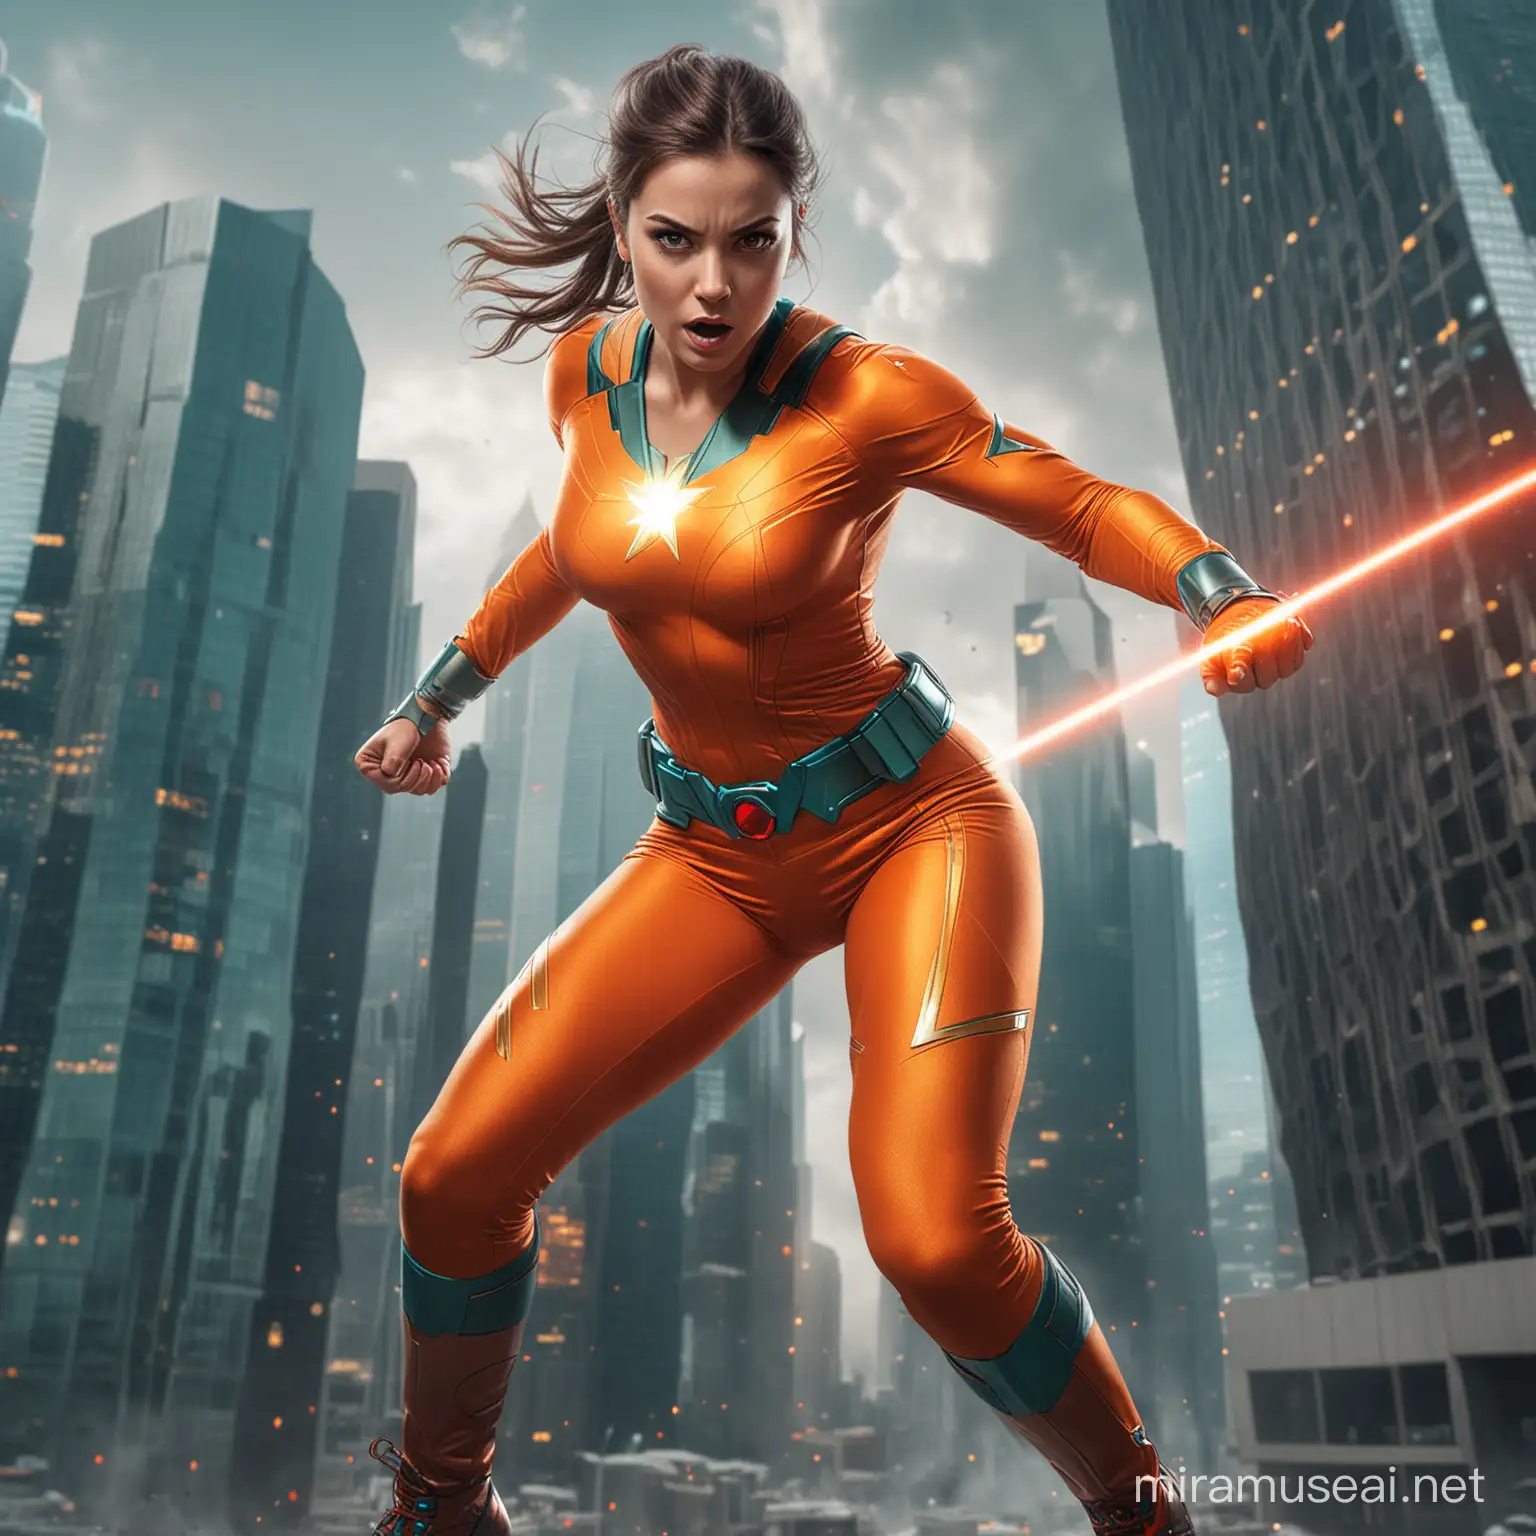 petite female super hero with glowing red laser eyes, wearing orange and teal tight clothing, angry,  flying over skyscrapers, full body